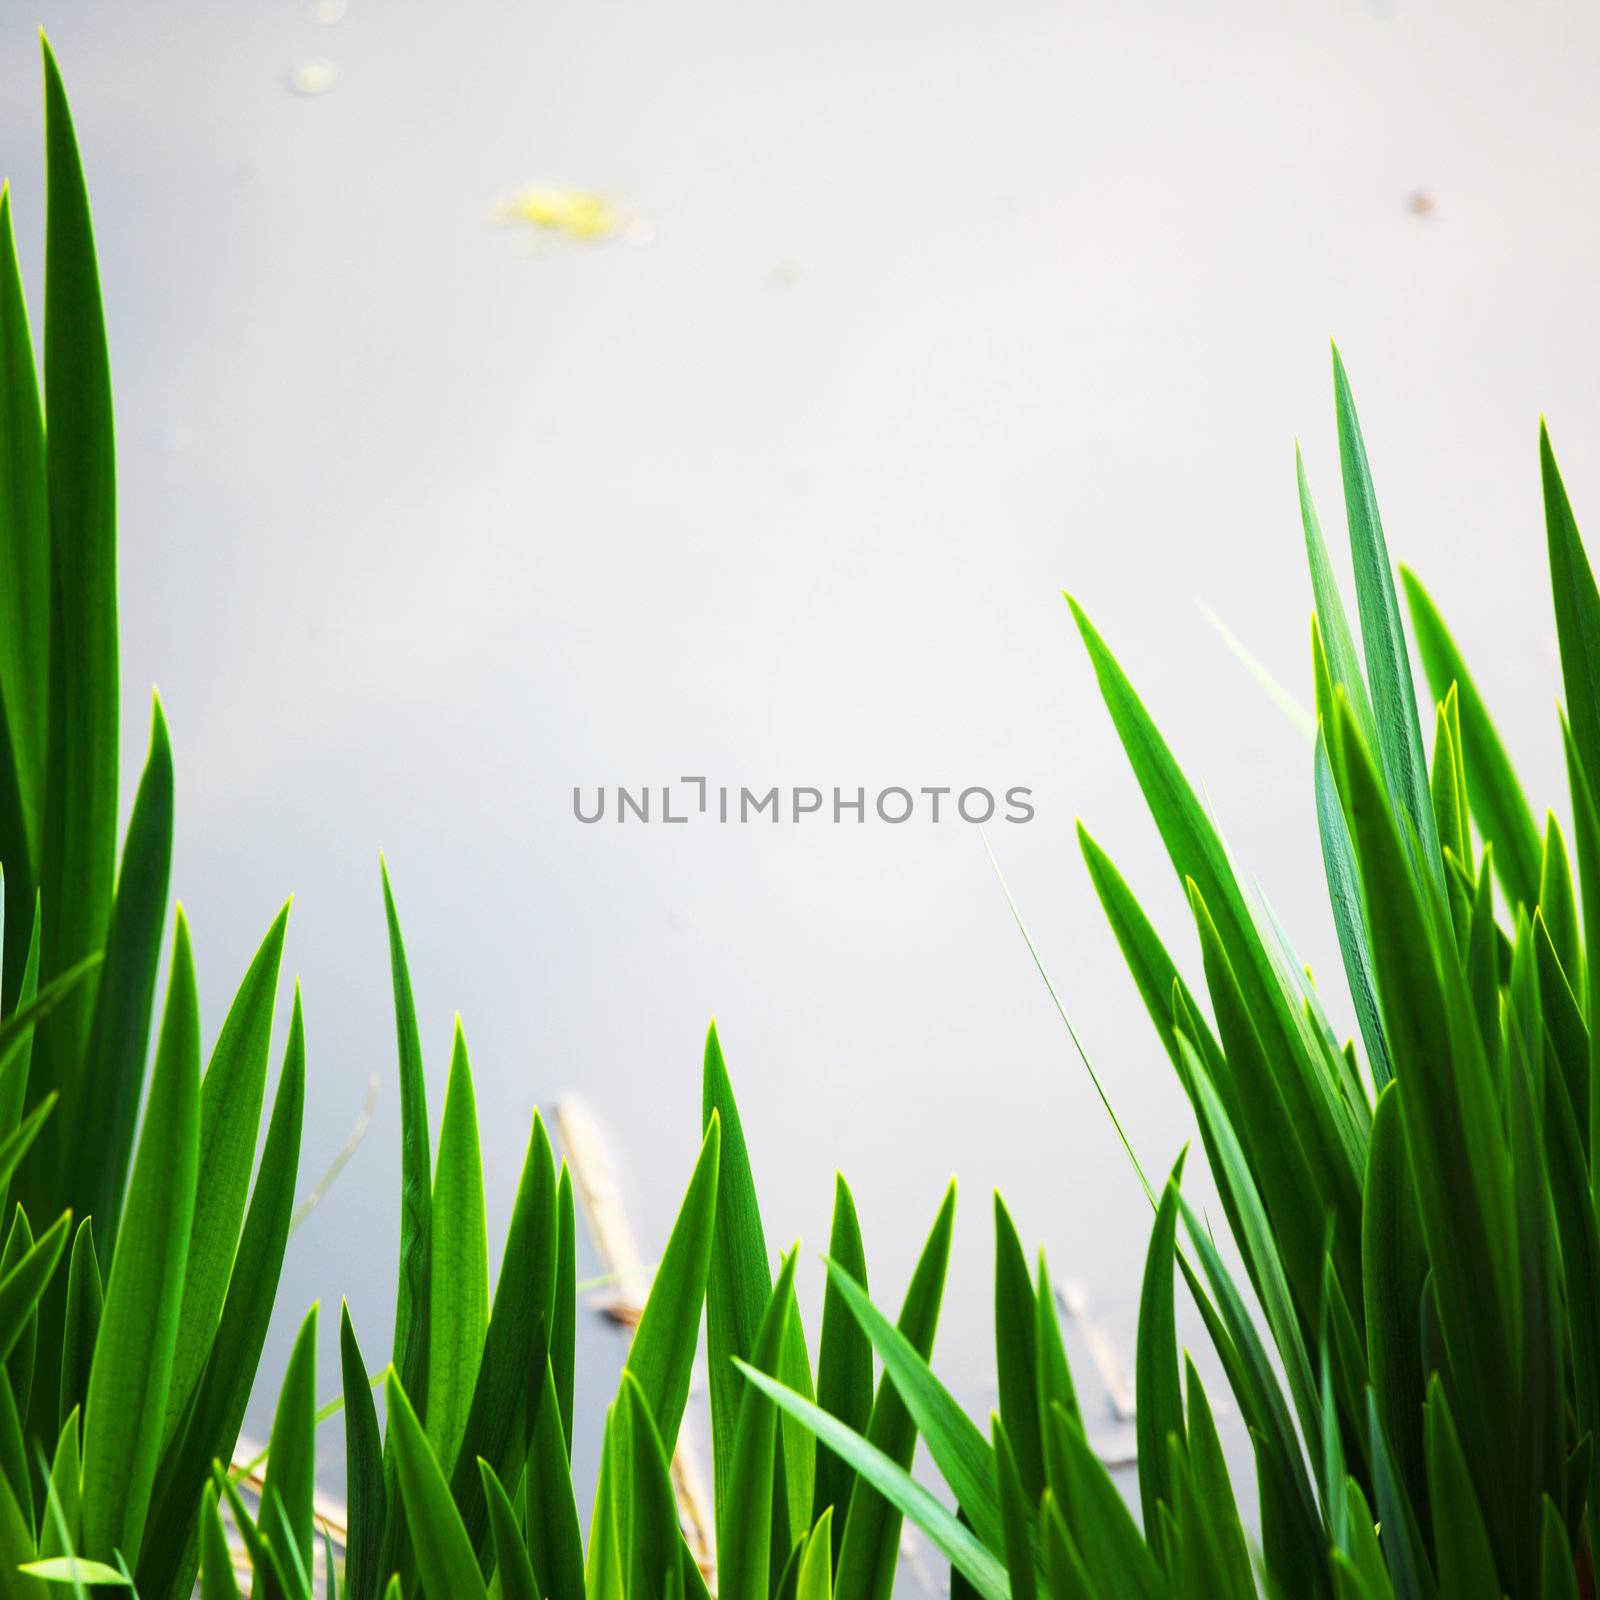 grass on water background